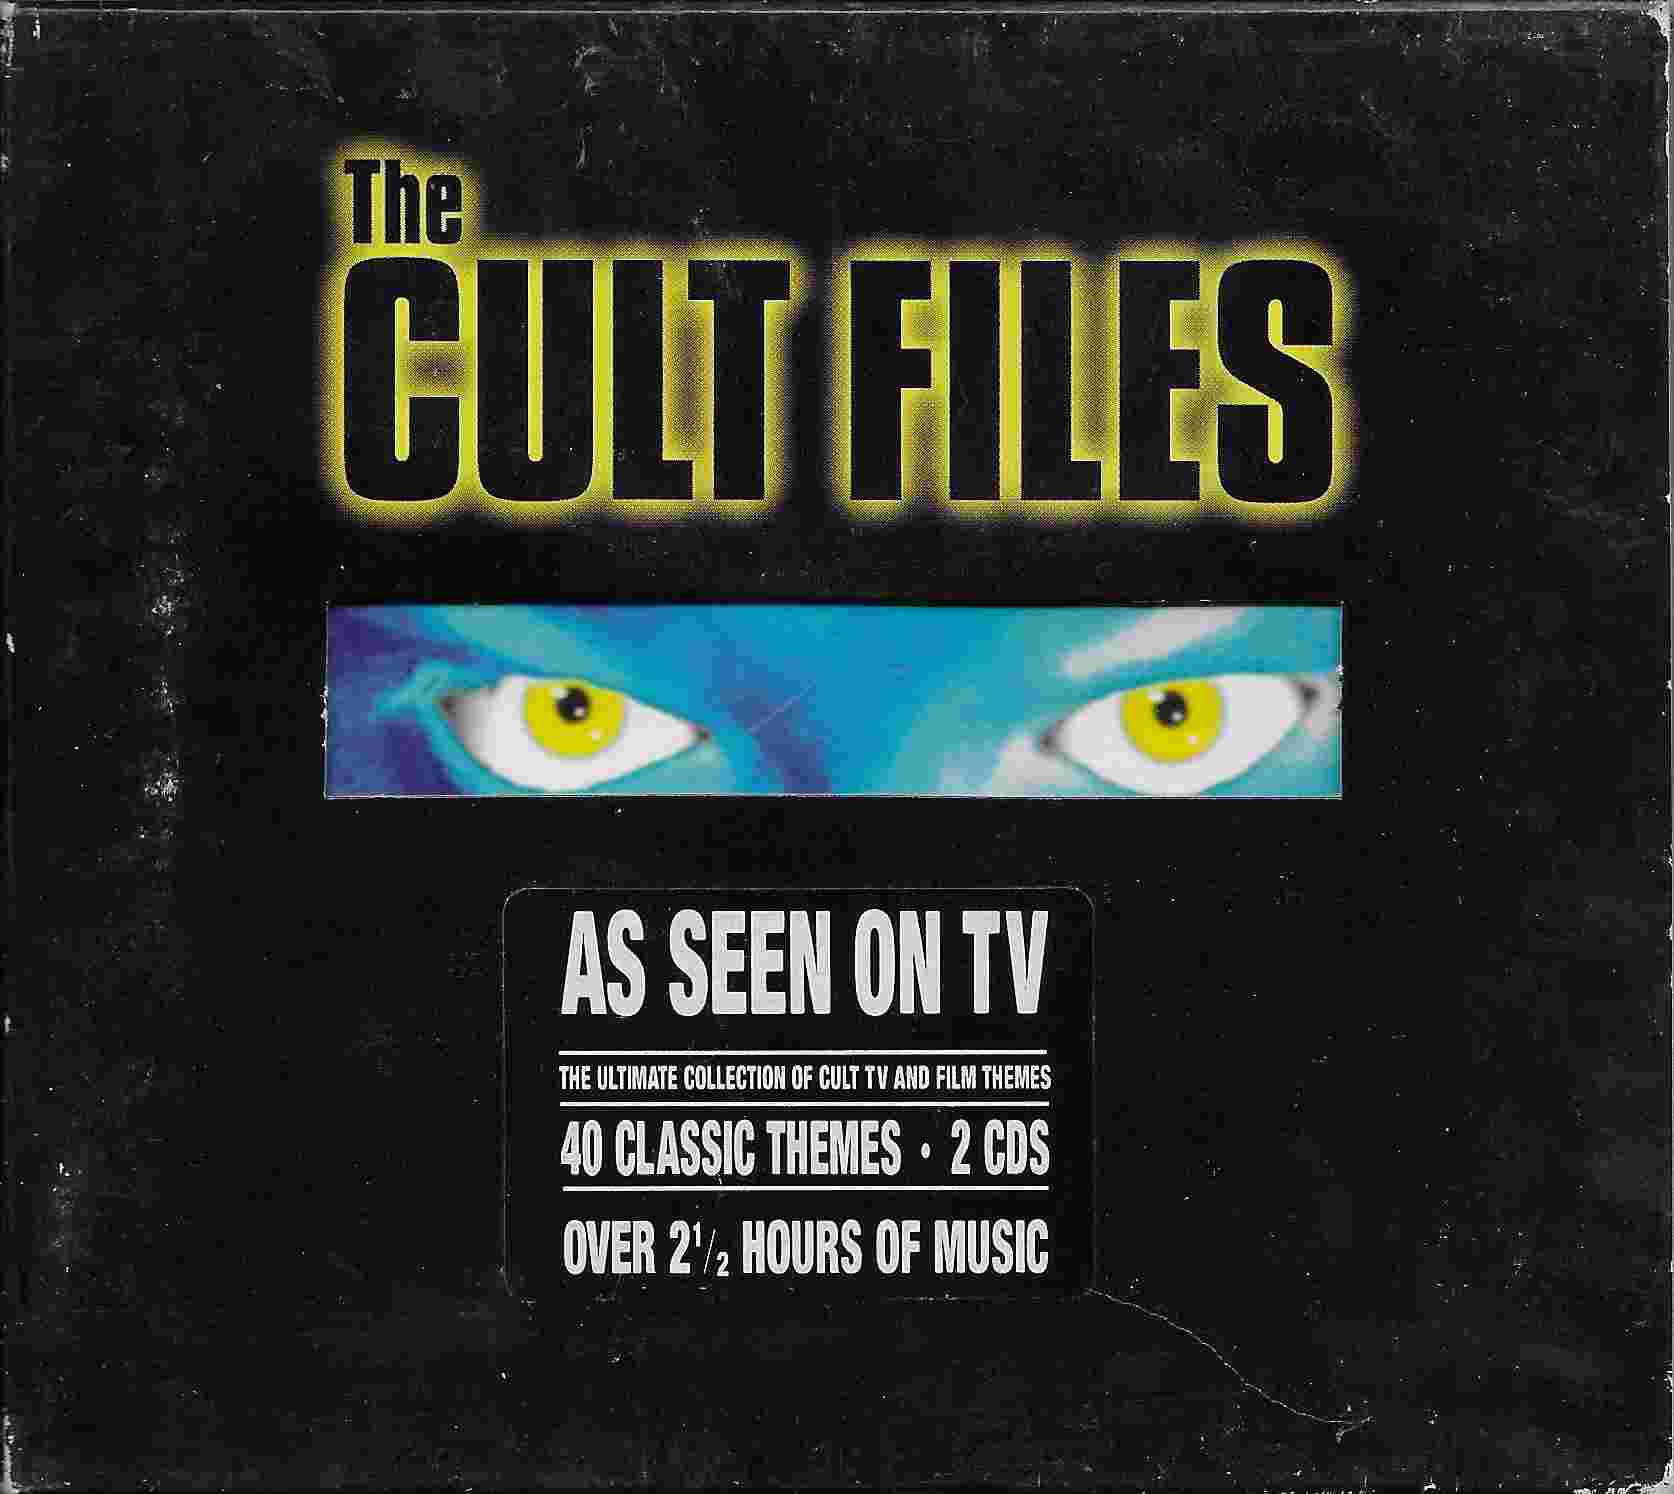 Picture of The cult files by artist Various from ITV, Channel 4 and Channel 5 cds library